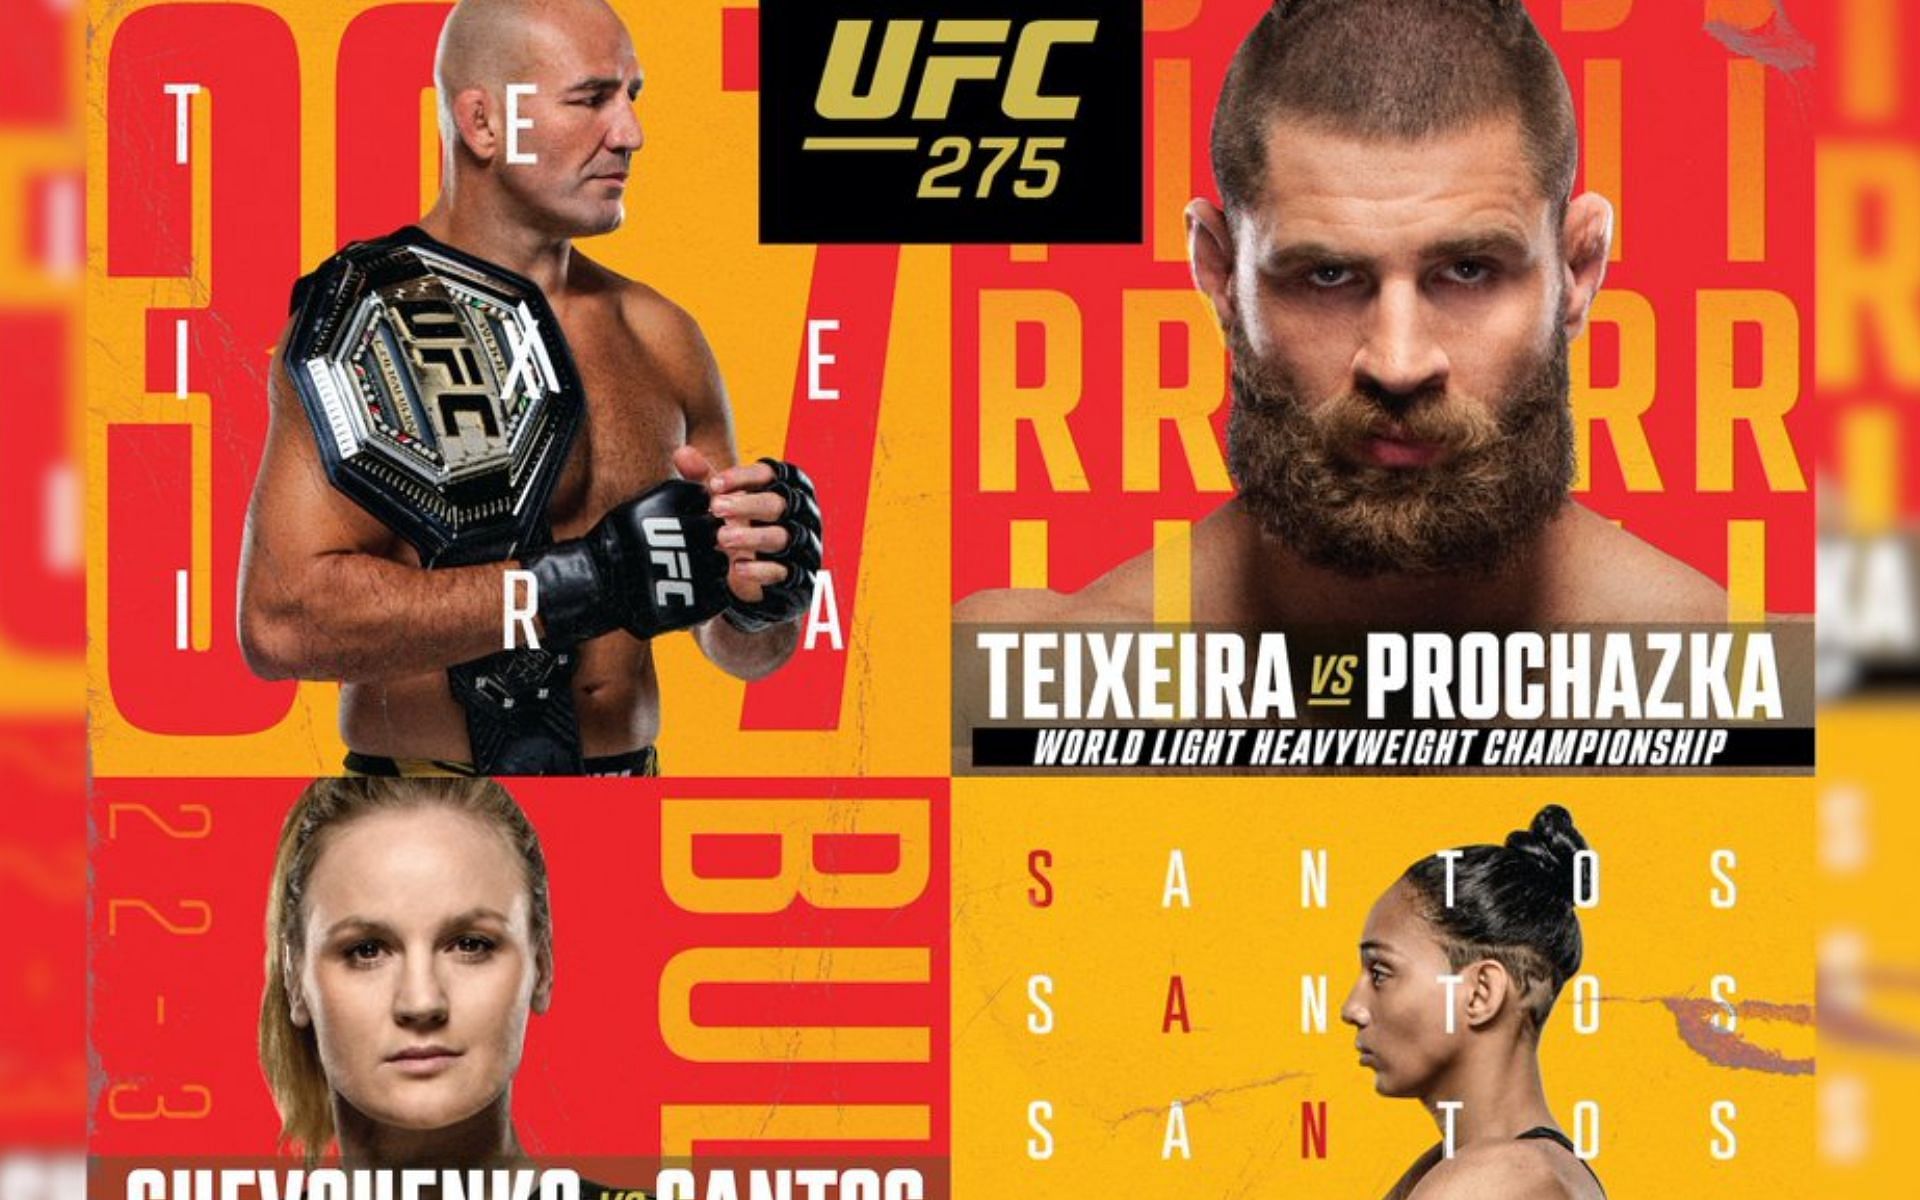 UFC 275 poster [Images courtesy of @UFC on Twitter]